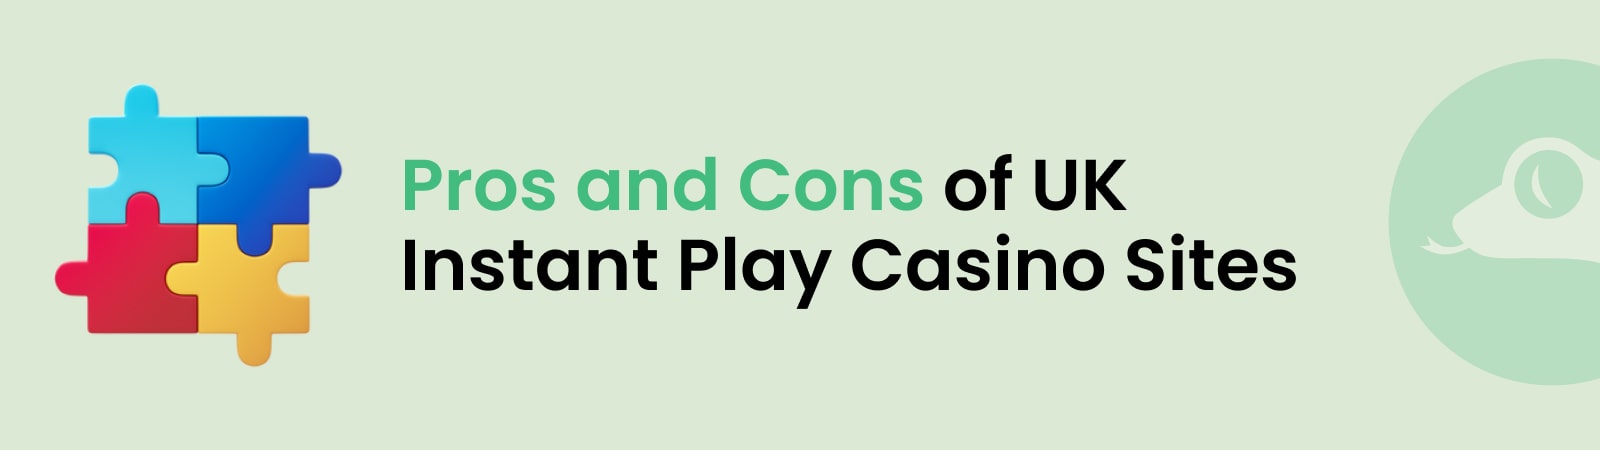 pros and cons of uk instant play casino sites